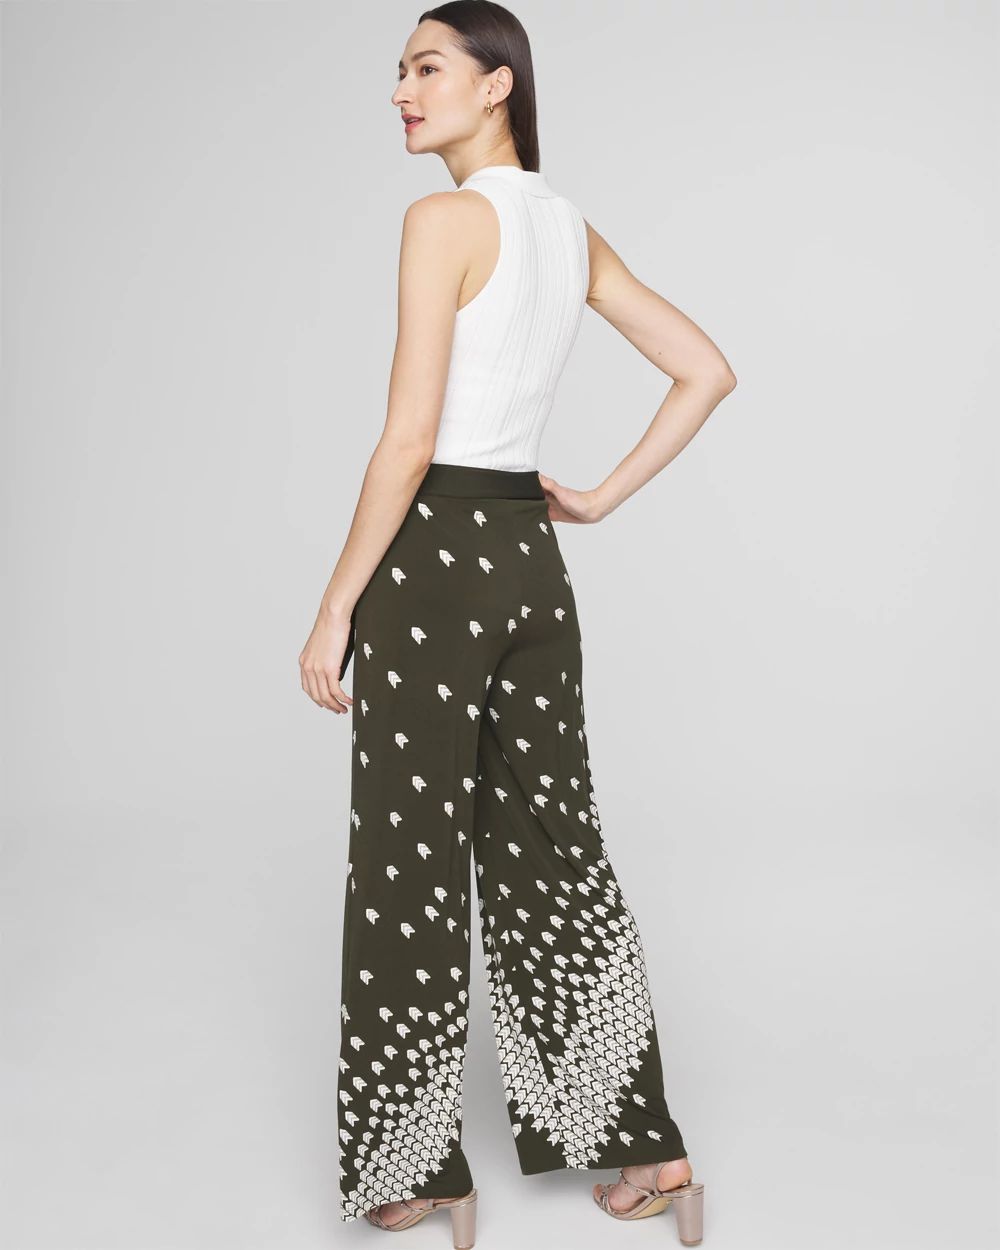 Matte Jersey Wide-Leg Pants click to view larger image.